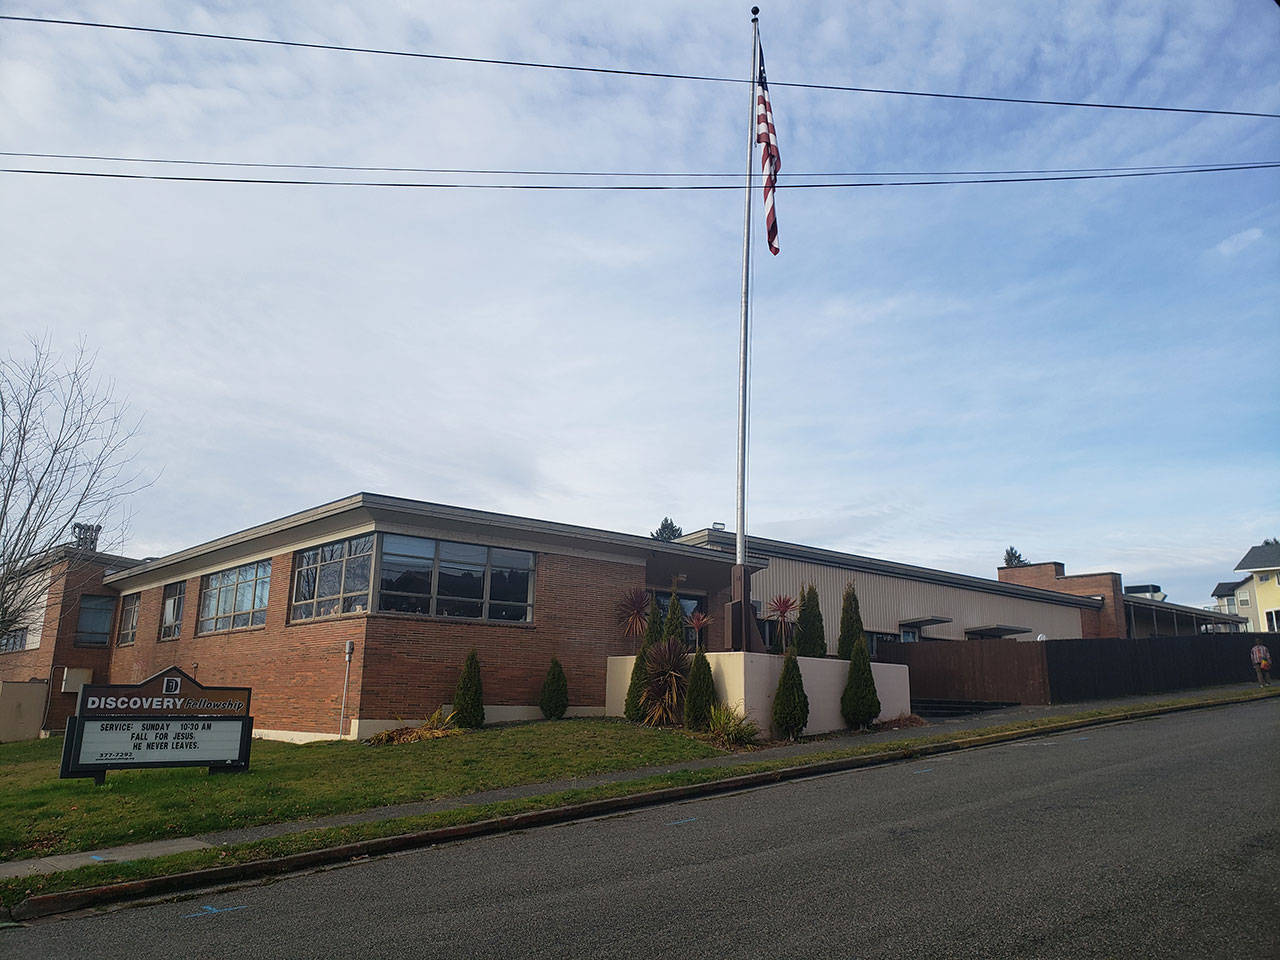 Offering something new: charter school coming to Manette in 2020